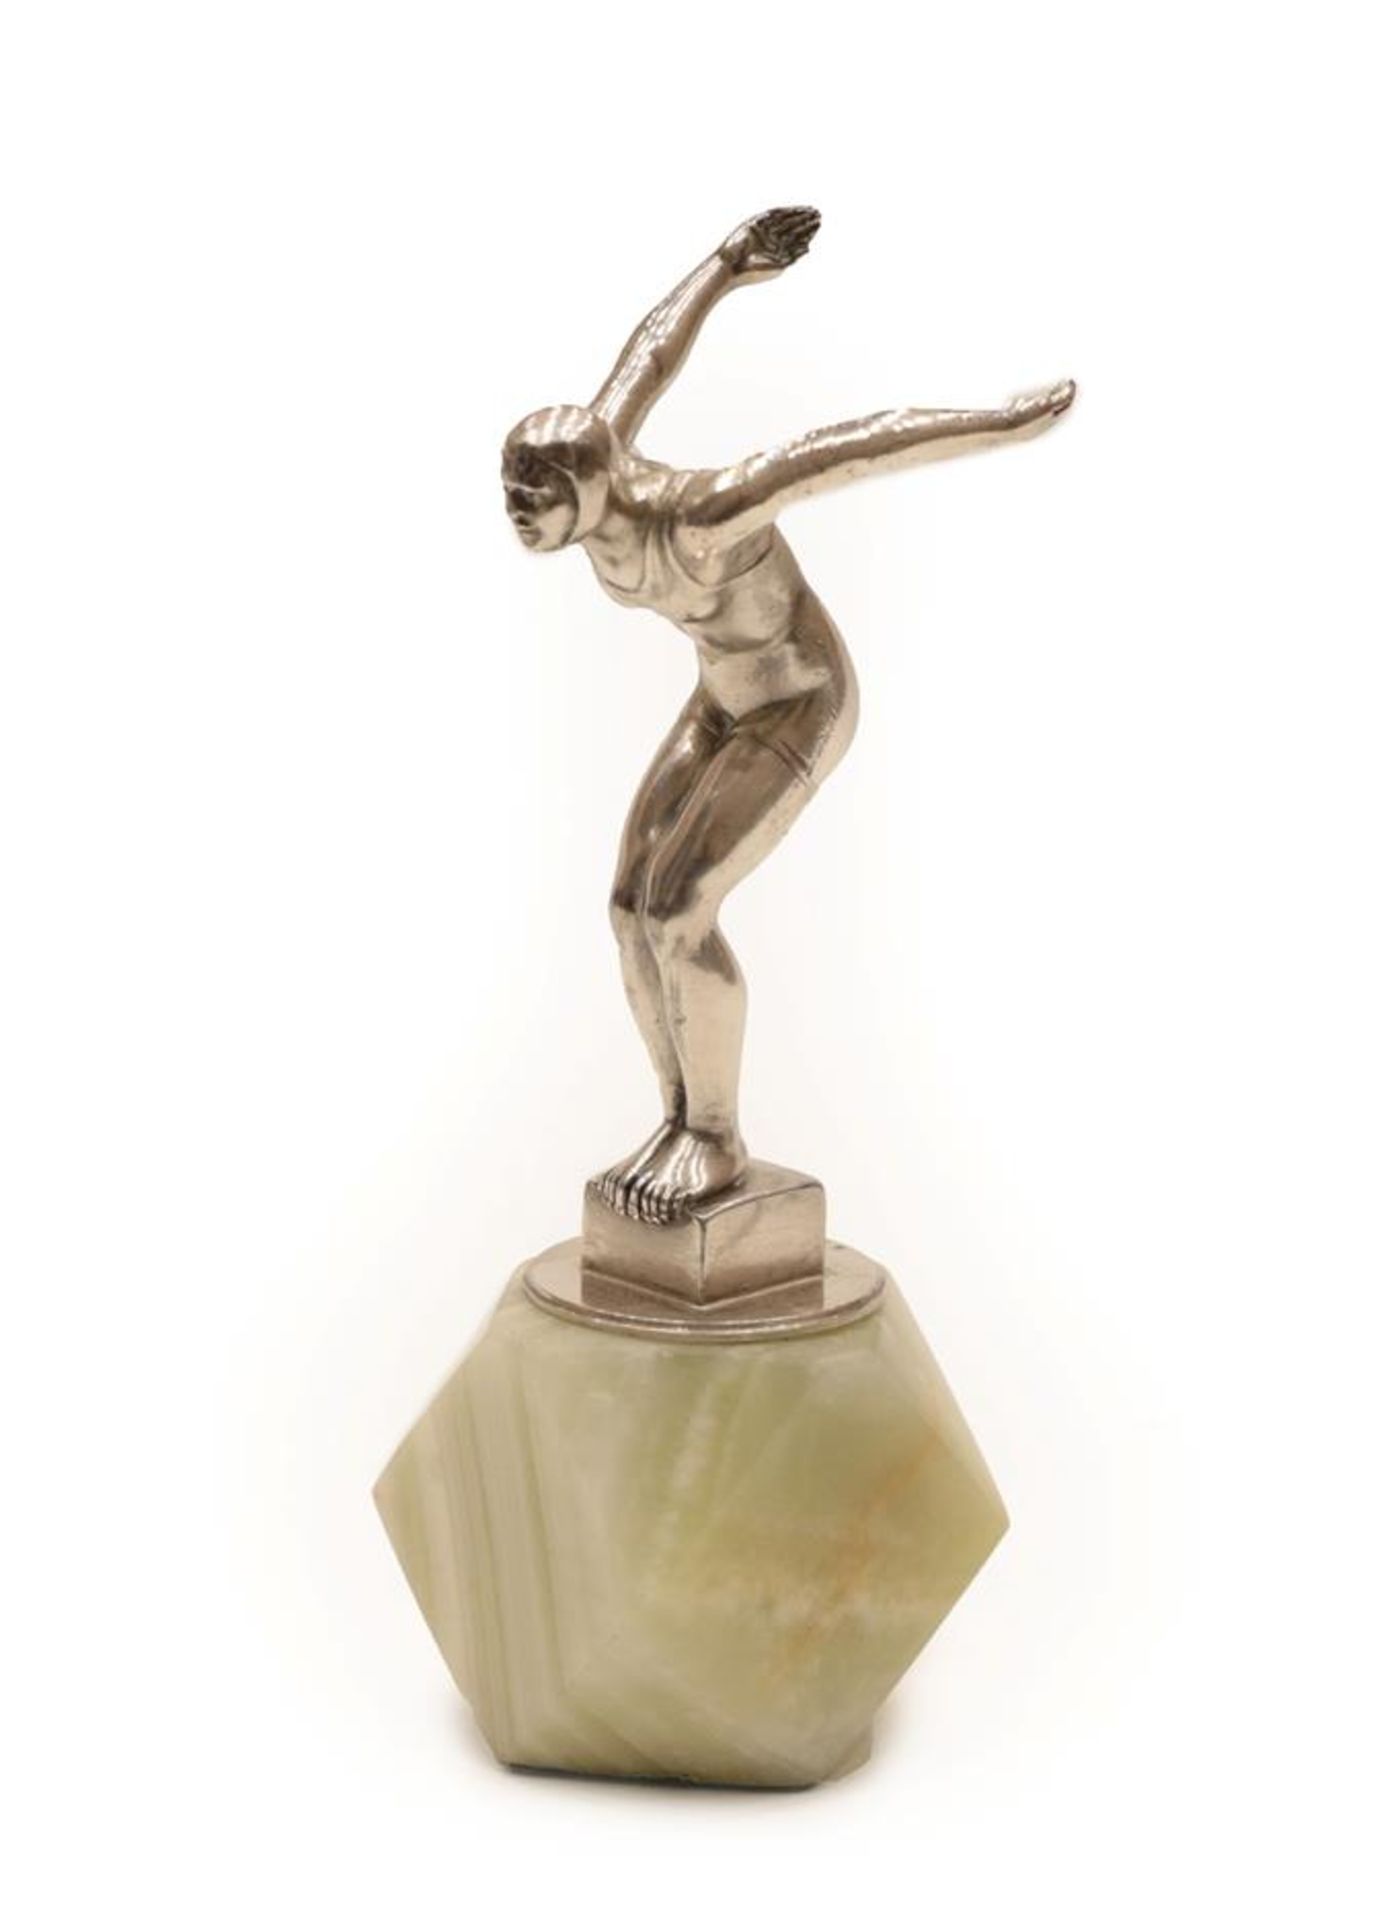 A 1920/30 Nickel Plated Car Mascot as a Female Swimmer in Diving Pose, standing upon a square